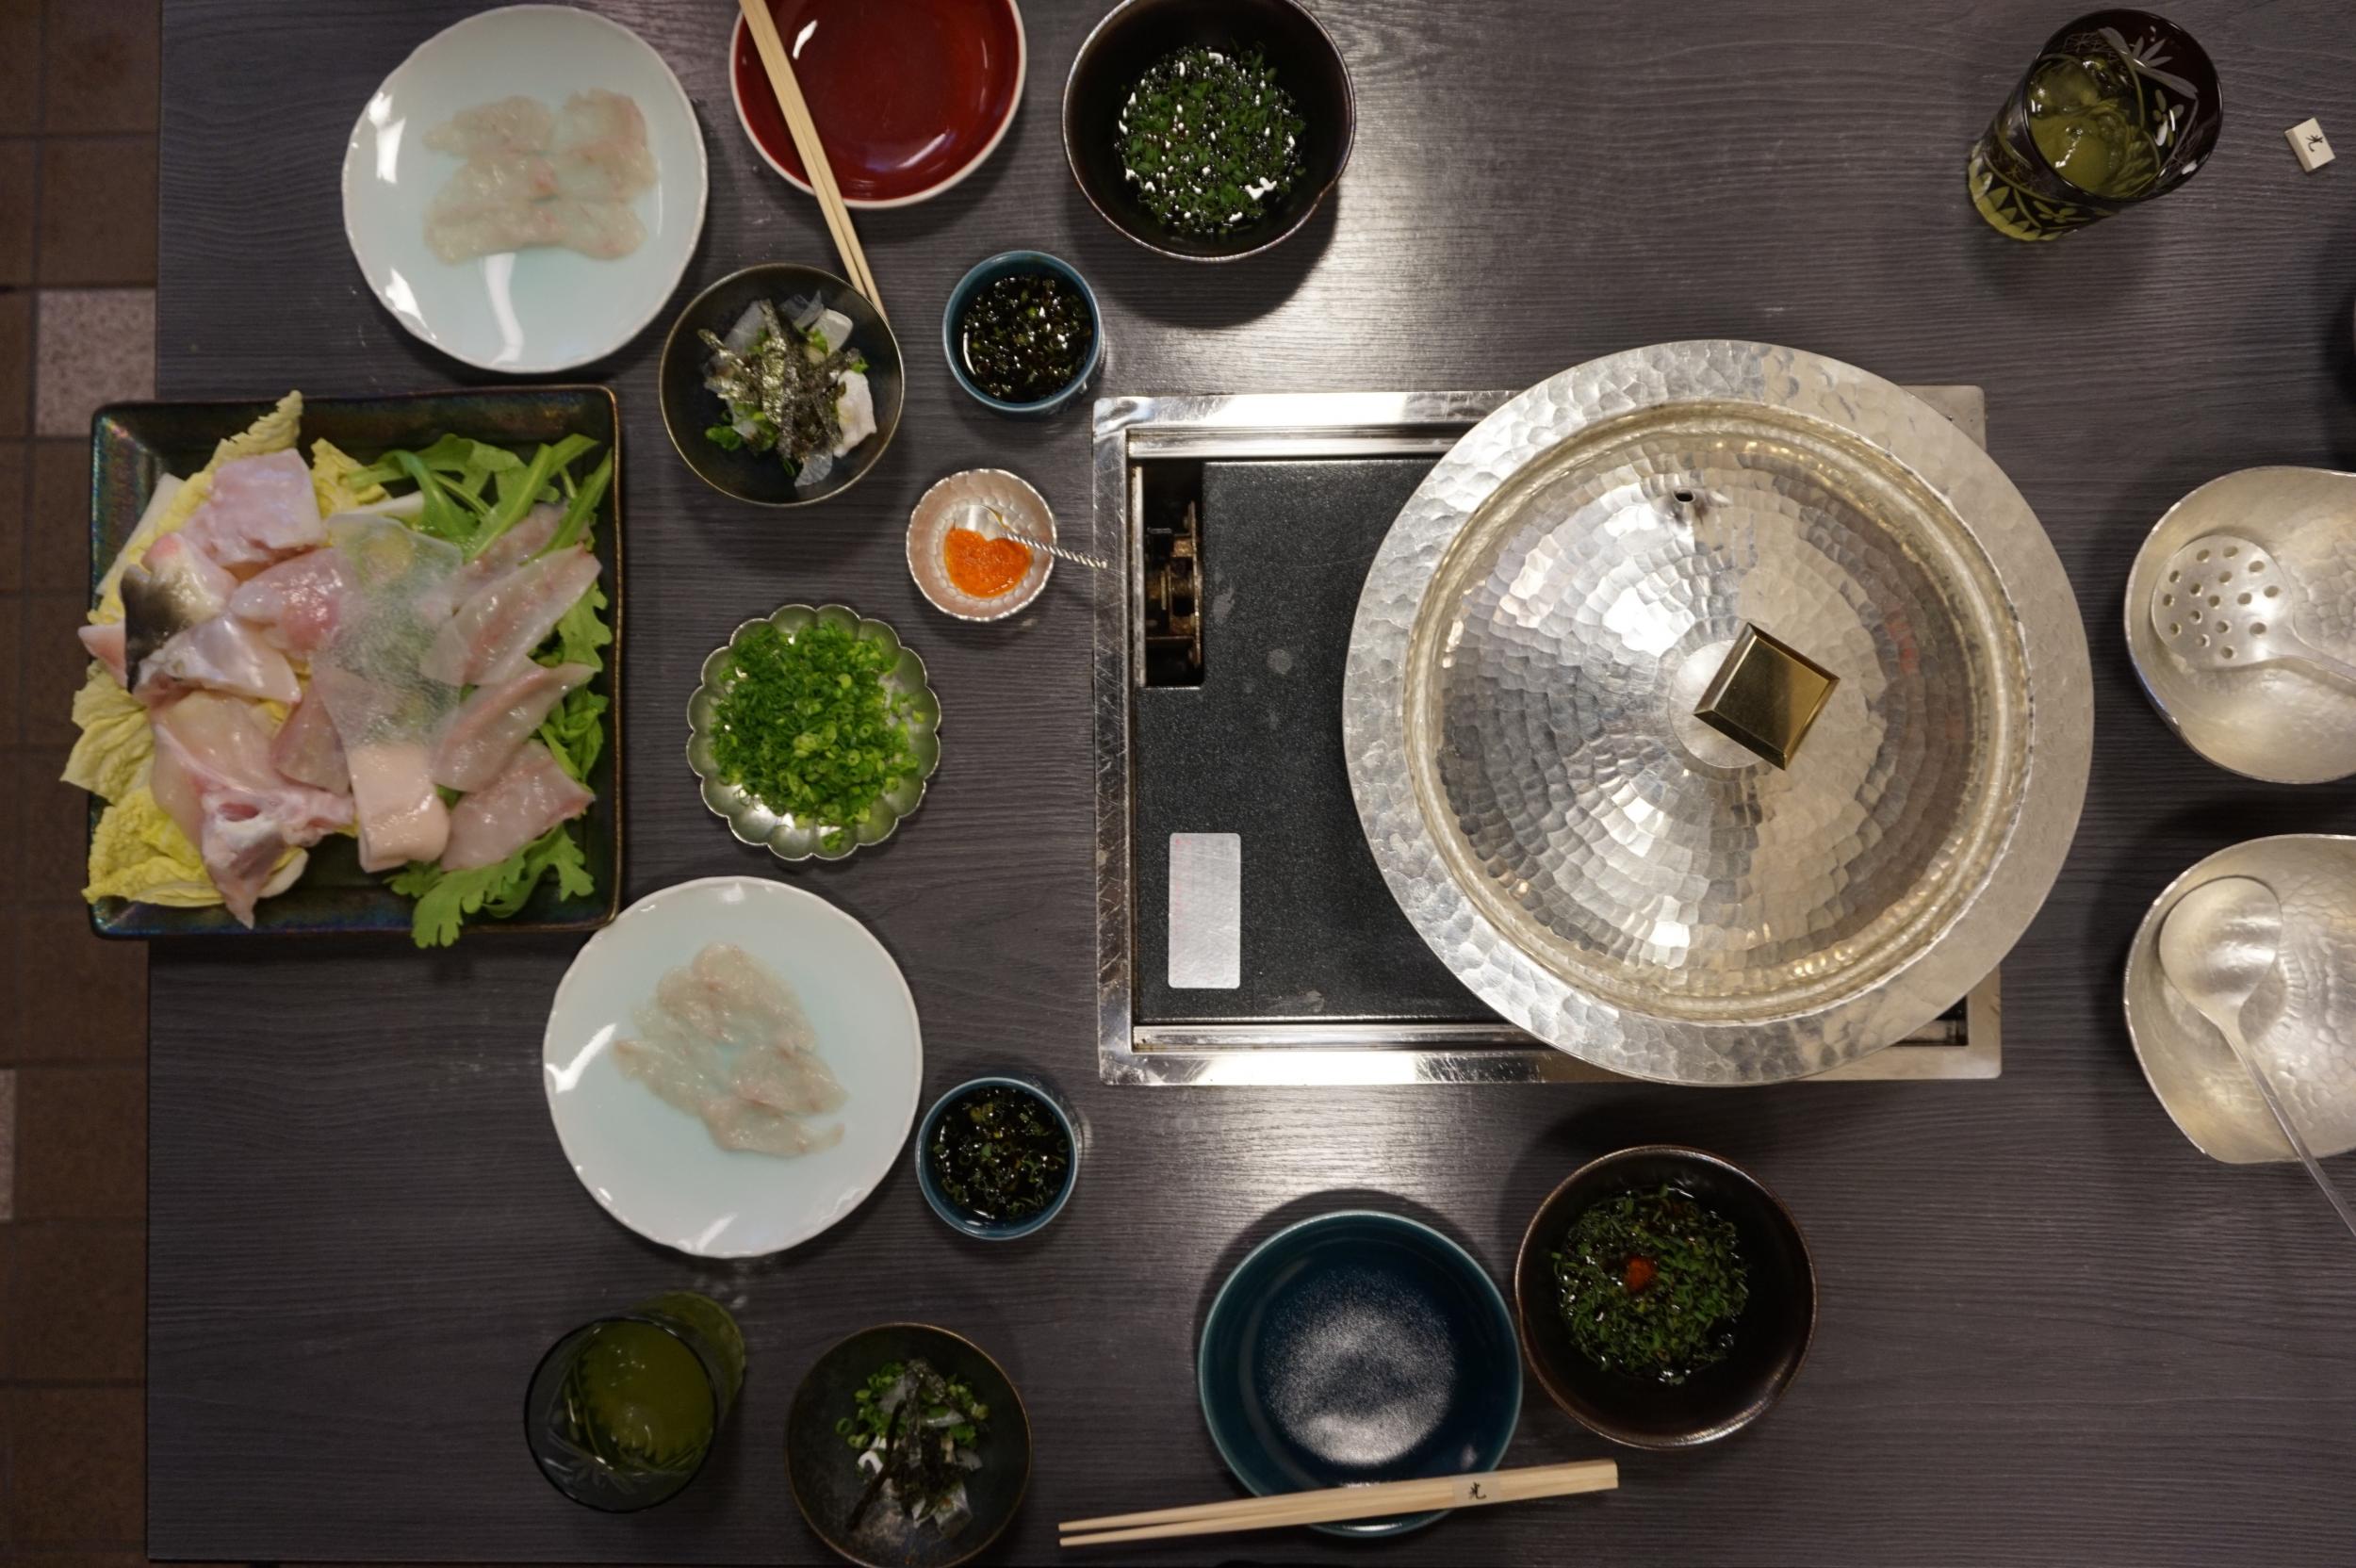 Fugu is traditionally served as part of a multi-course tasting menu